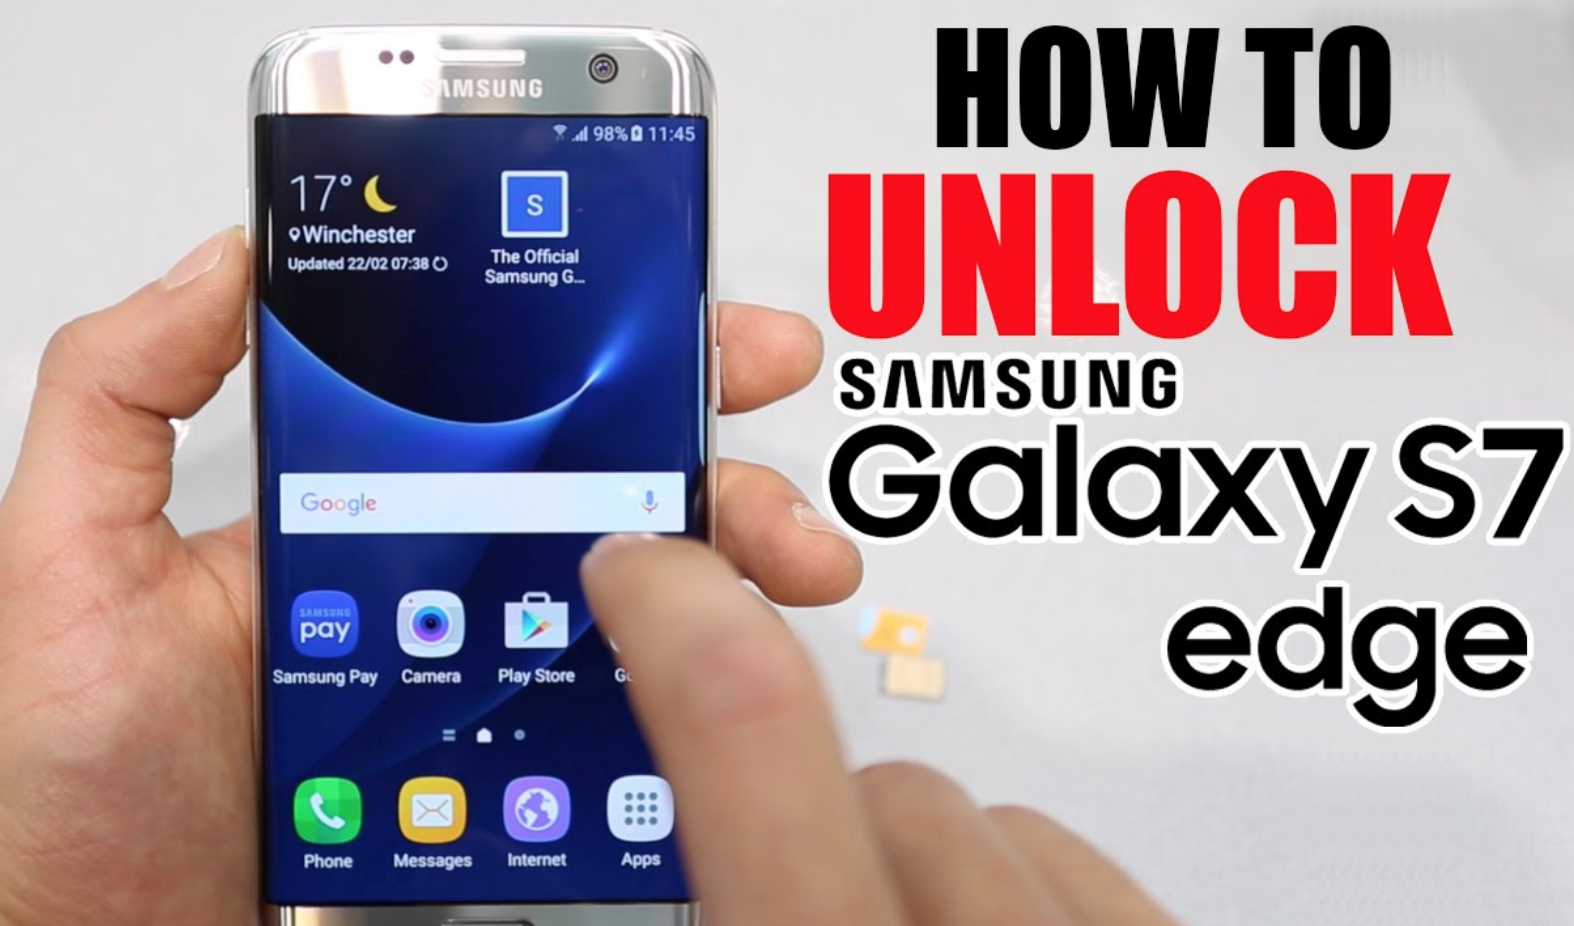 Samsung Galaxy S7/S7 Edge Remote Unlock Service All Carriers Supported 